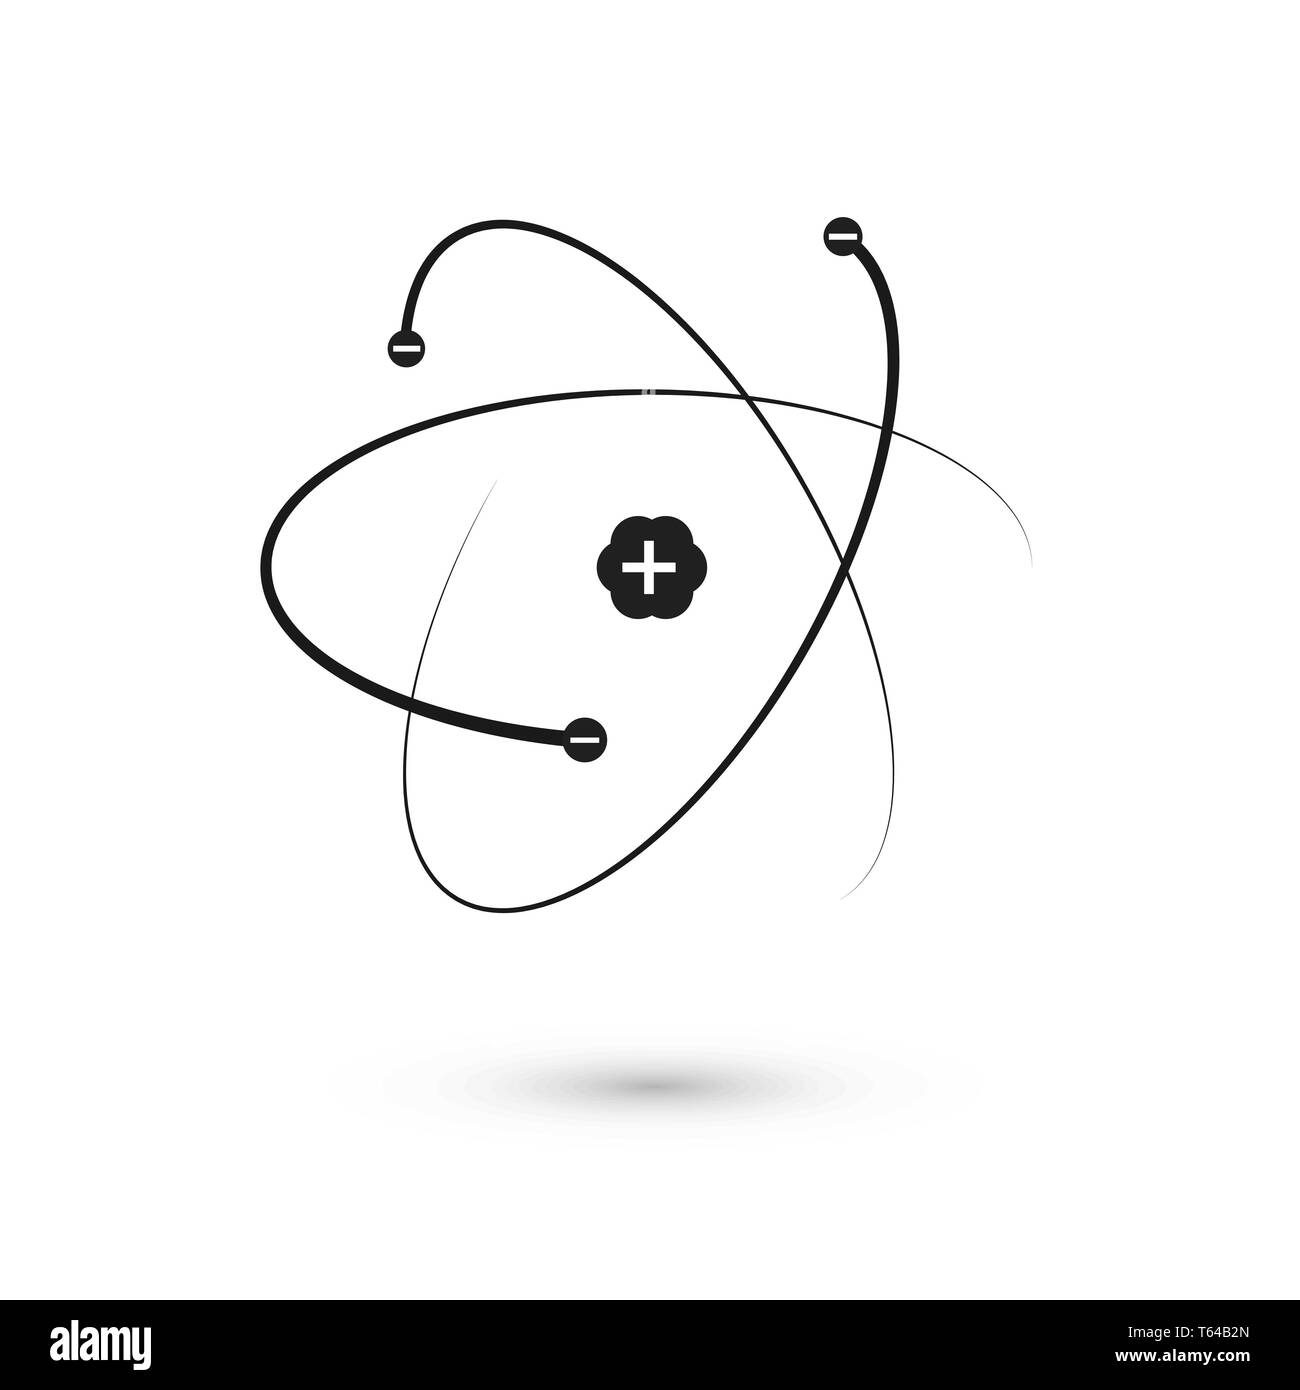 Atom icon. Nucleus and electrons. Vector illustration isolated on white background Stock Vector